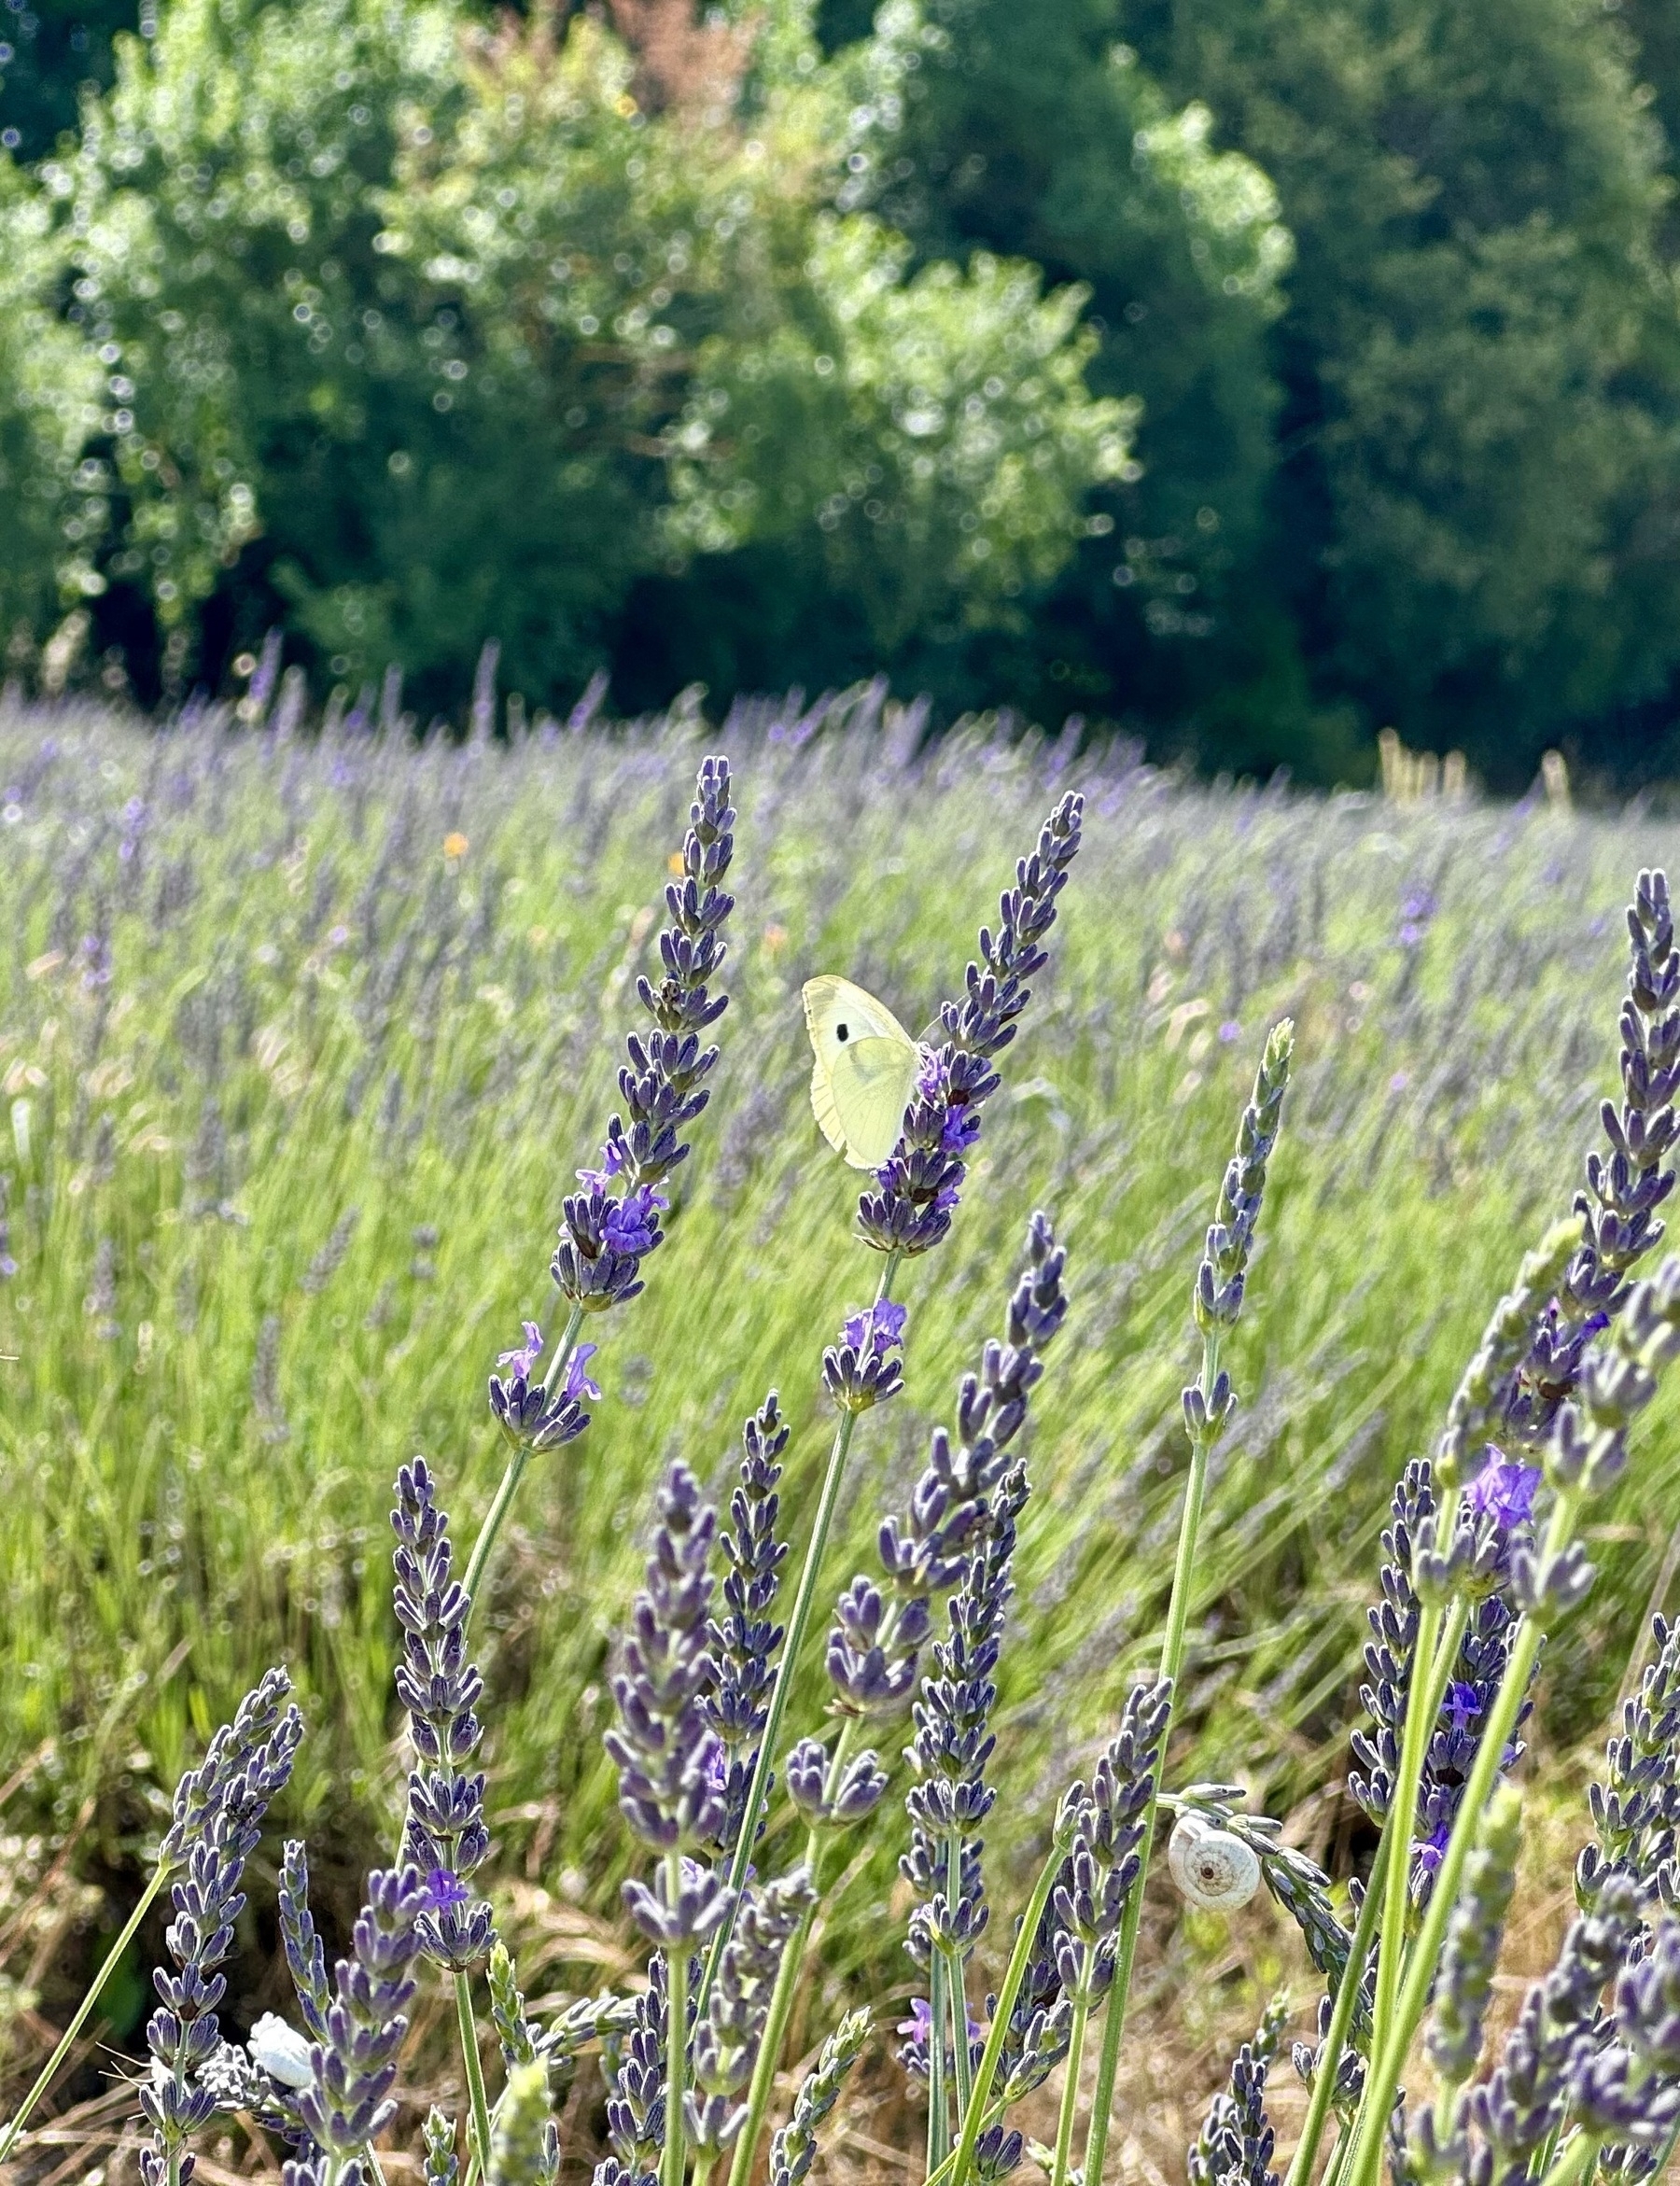 A butterfly perched on some lavender in a sunlit field.